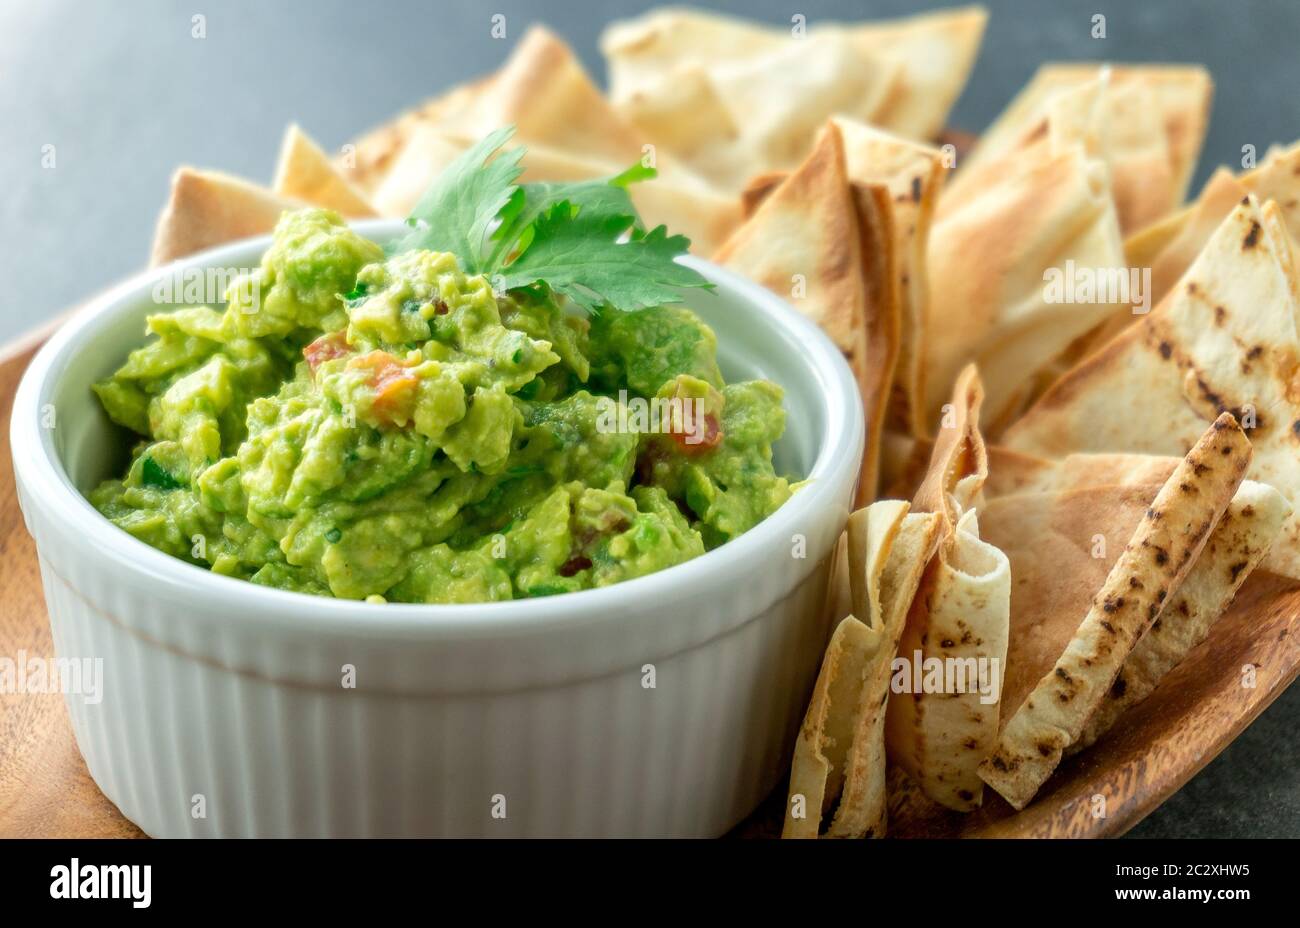 Mexican guacamole dish. Guacamole is a avocado based dip, traditionally a mexican (Aztecs) dish. Healthy and easy to make snack at home. Stock Photo